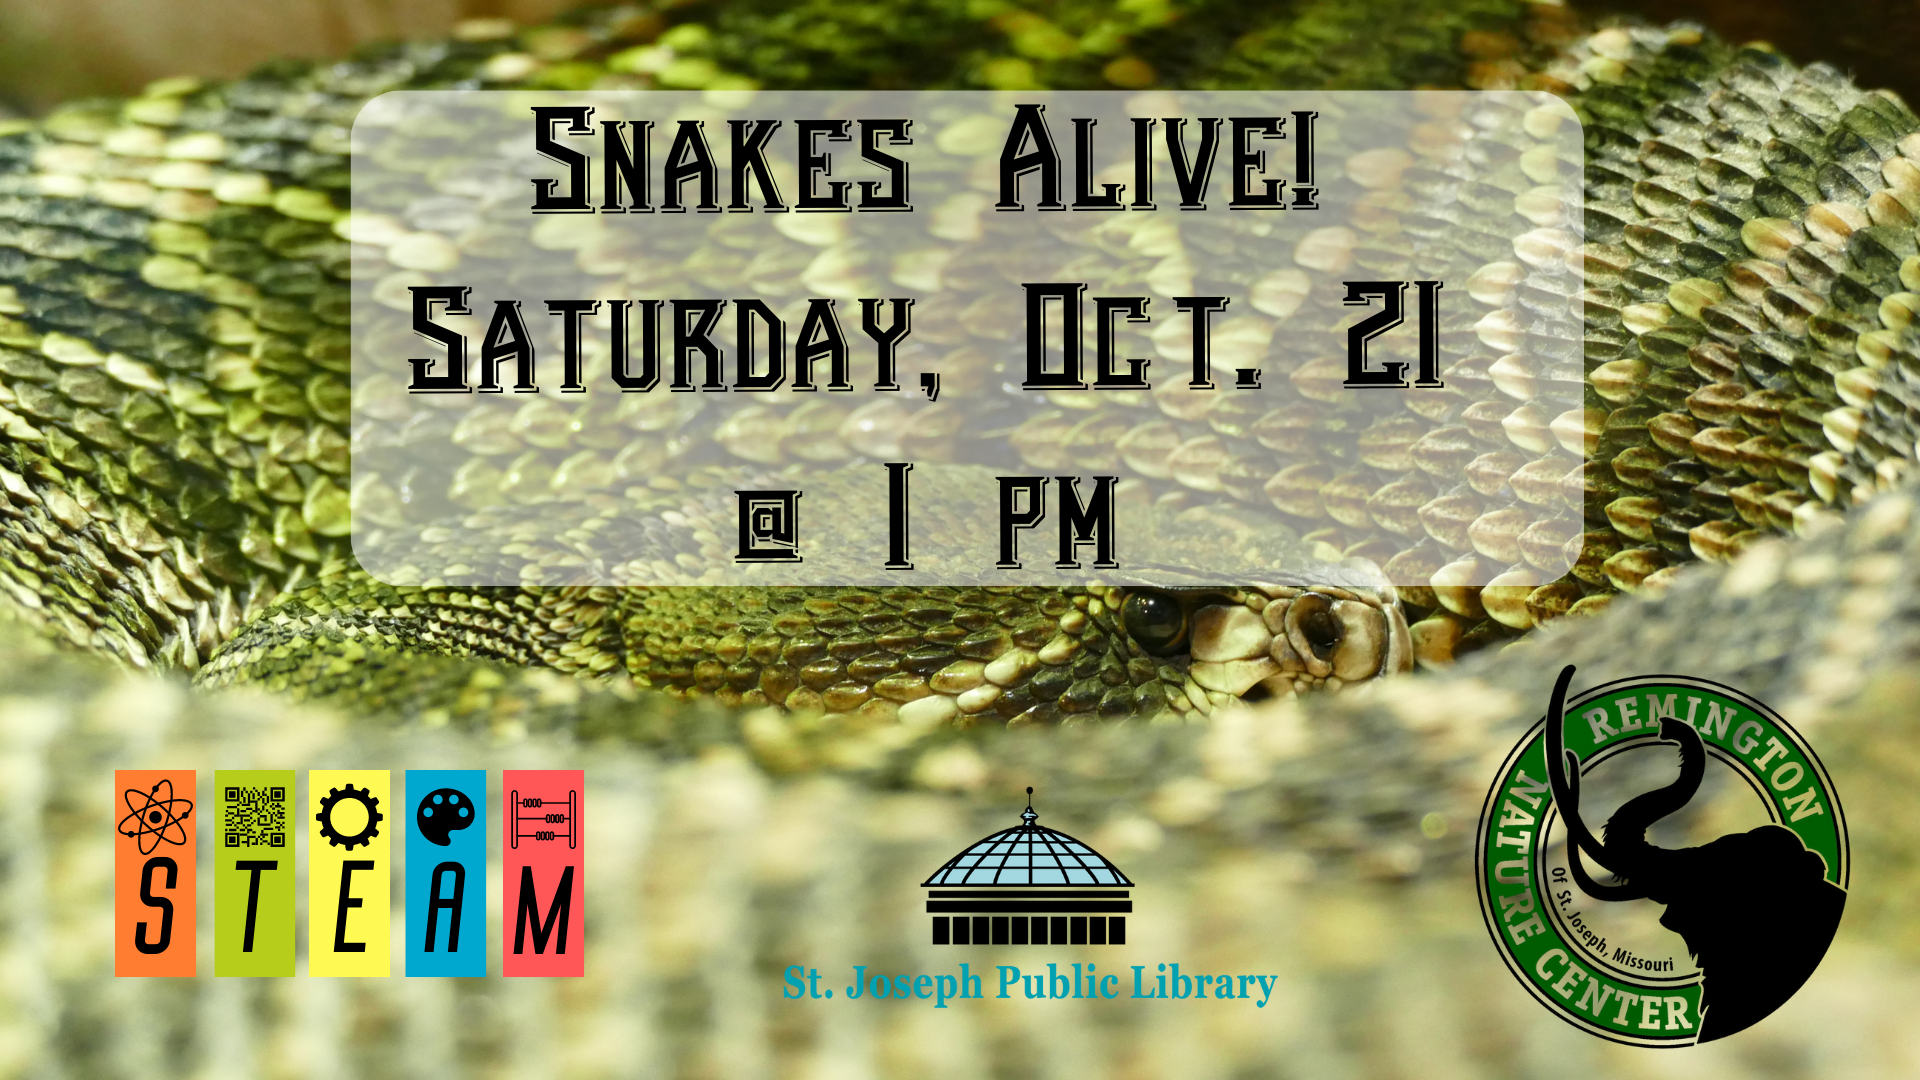 Snakes Alive presentation East HIlls Library Oct. 21 at 1 p.m.